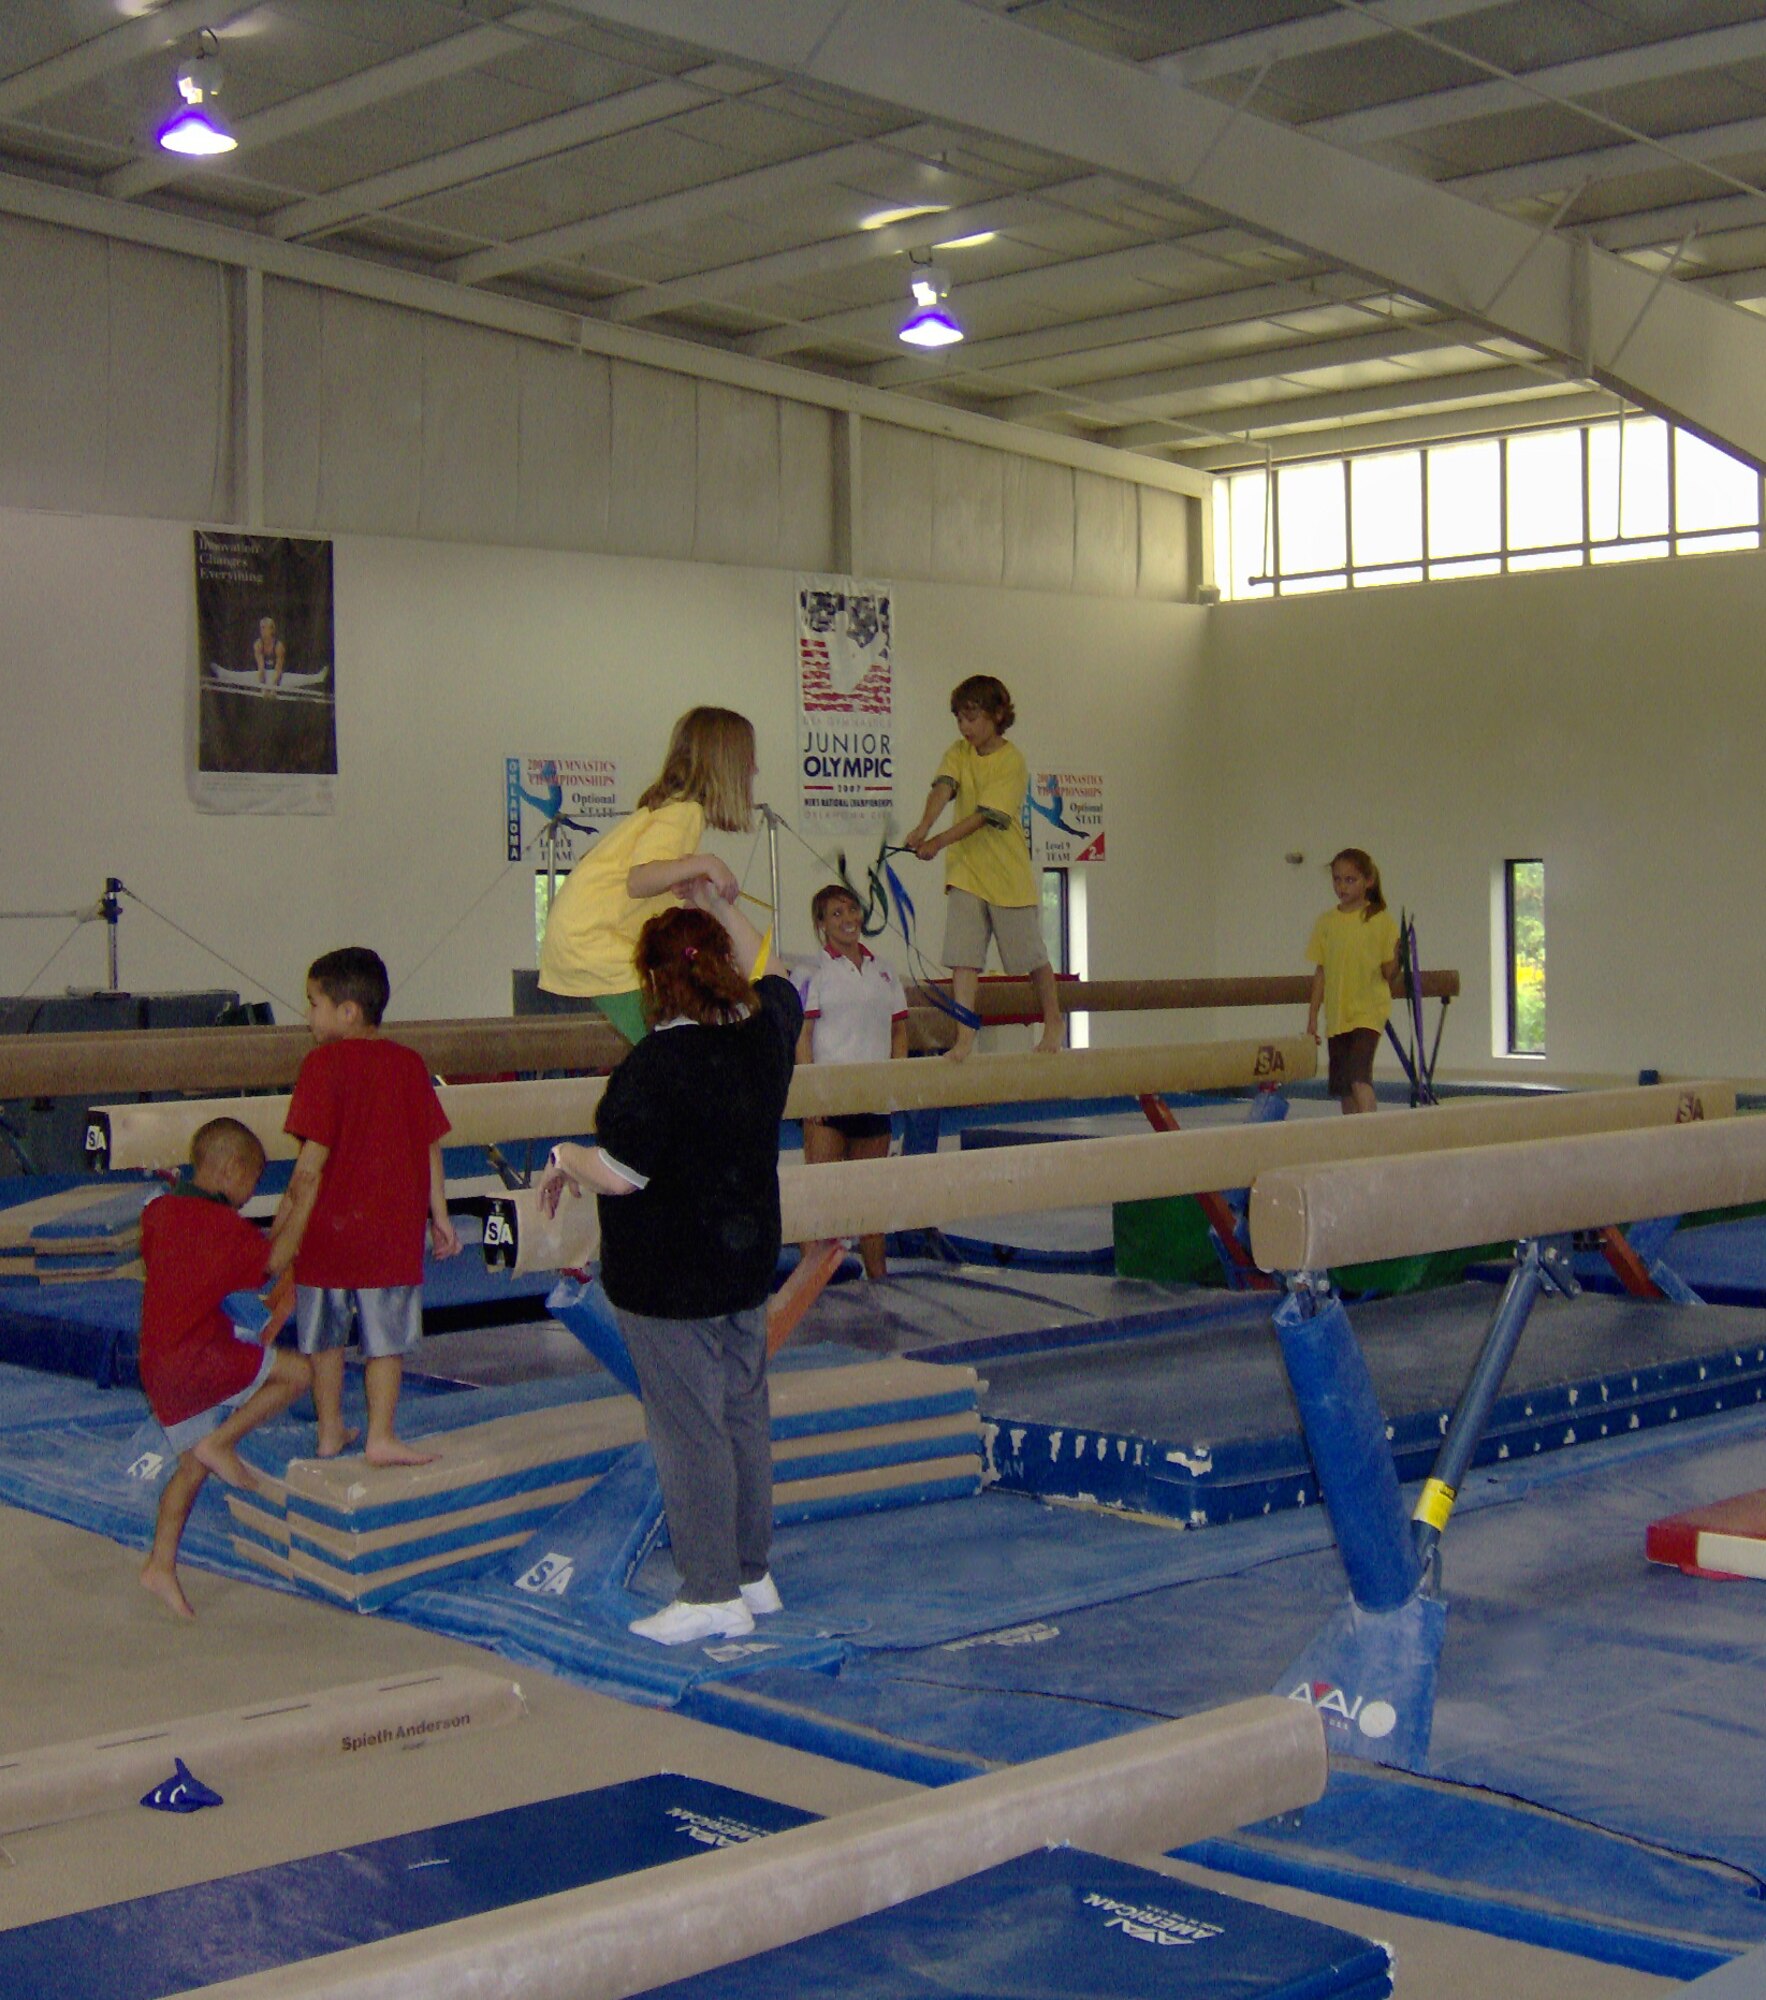 Children in Vance Air Force Base's School Age program test their balance at the Bart Conner Gymnastics Academy, where they met two-time Olympic Champion Bart Conner, as well as Nadia Comaneci, who scored the first "Perfect 10" in 1976 and won five gold medals, three silver medals and one bronze medal over two Olympic Games.  
